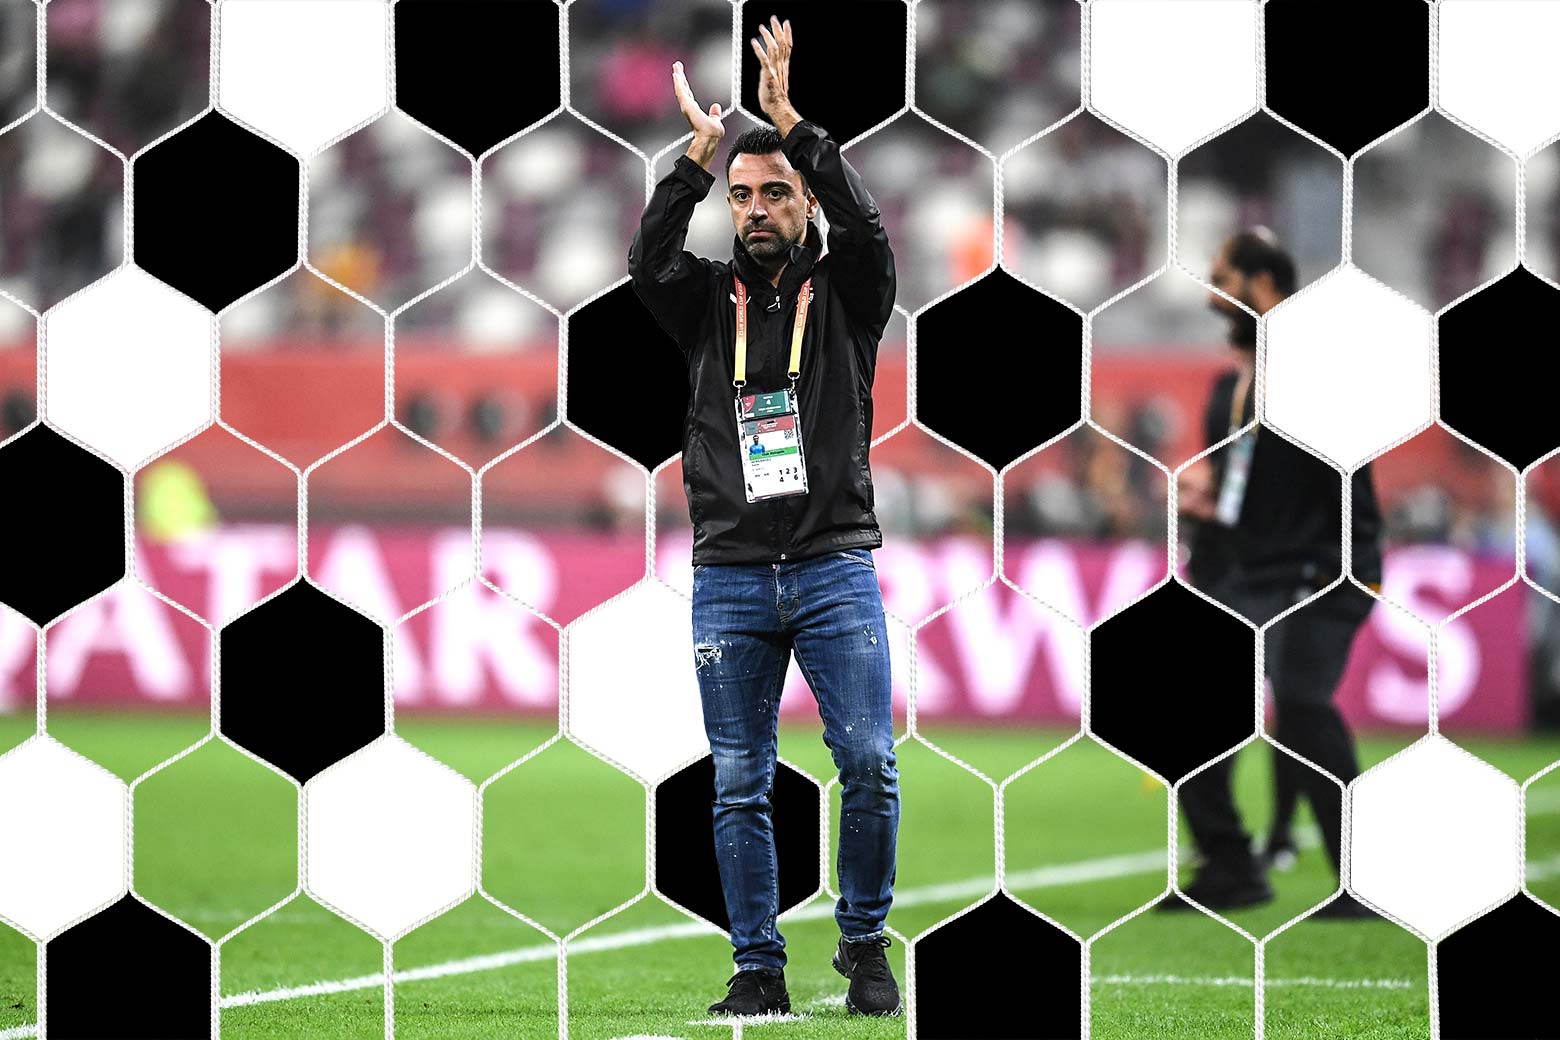 Xavi raises his arms and claps on the field with a big Qatar Airways logo behind him, a net scrim illustrated behind him.